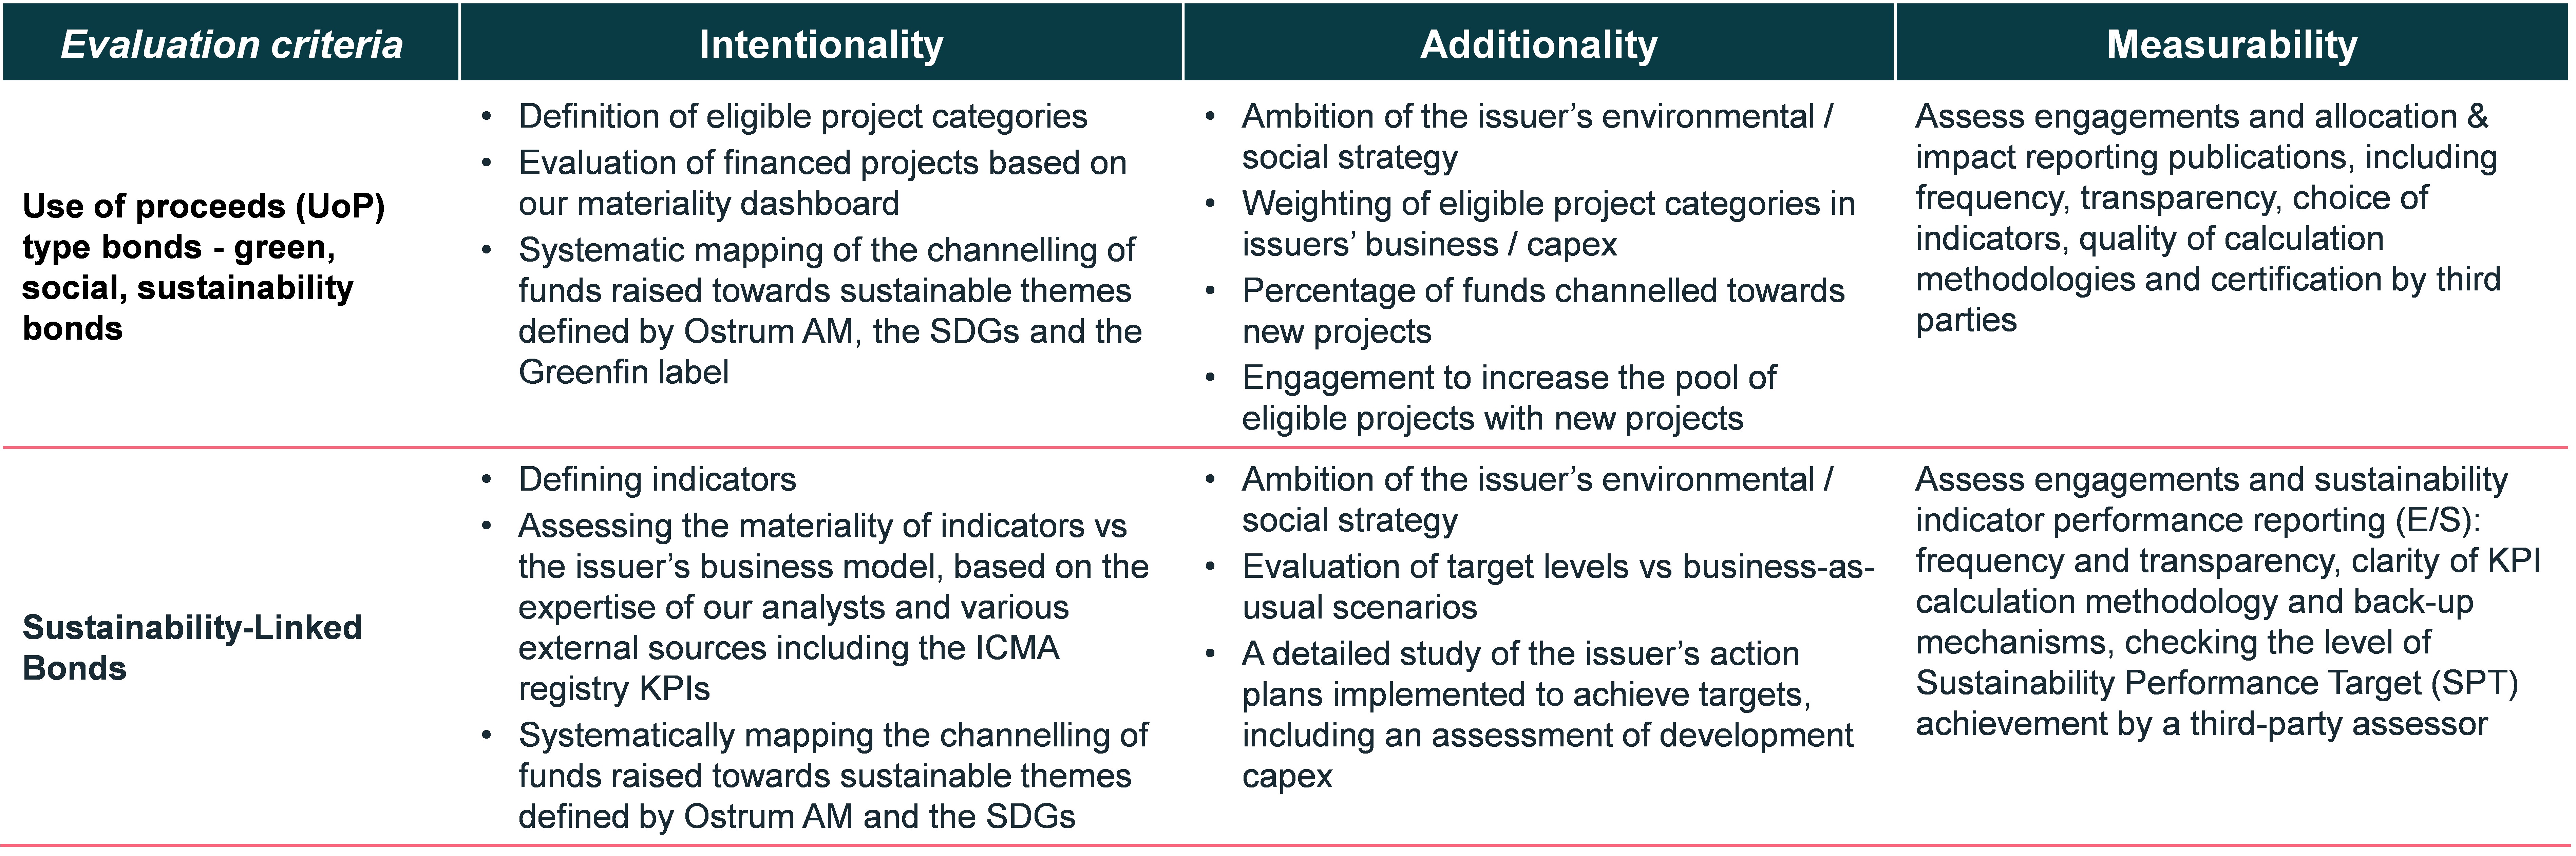 criteria-to-evaluate-intentionality-additionality-and-measurability